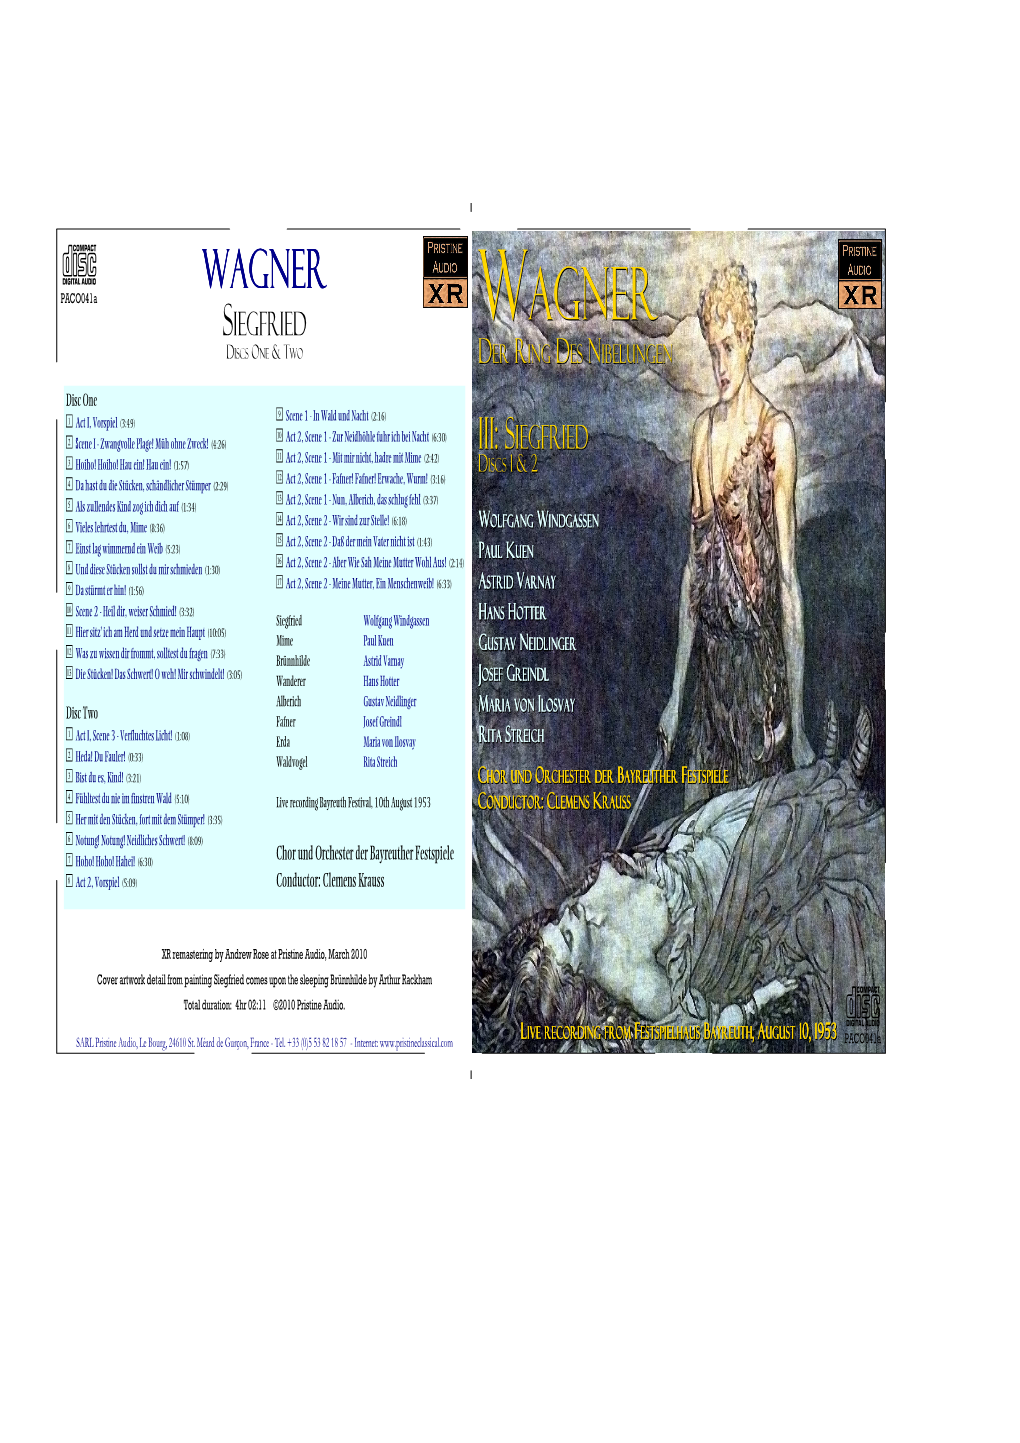 WAGNER Paco041a SIEGFRIED WAGNER DISCS ONE & TWO DER RING DES NIBELUNGEN